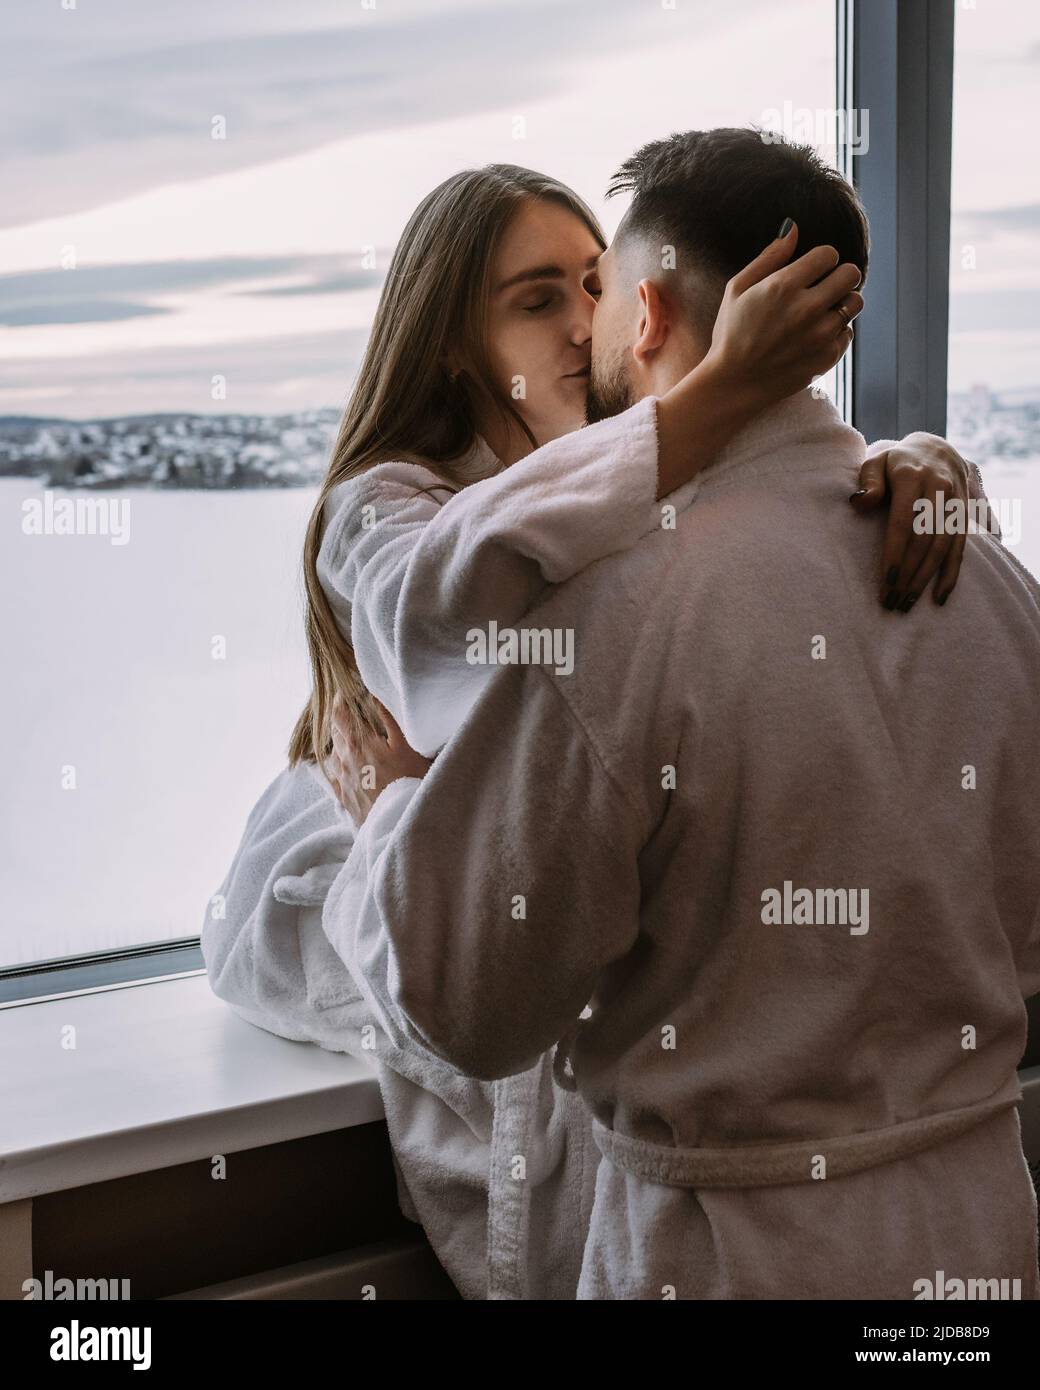 Happy couple in the hotel on window kiss and hug each other Stock Photo